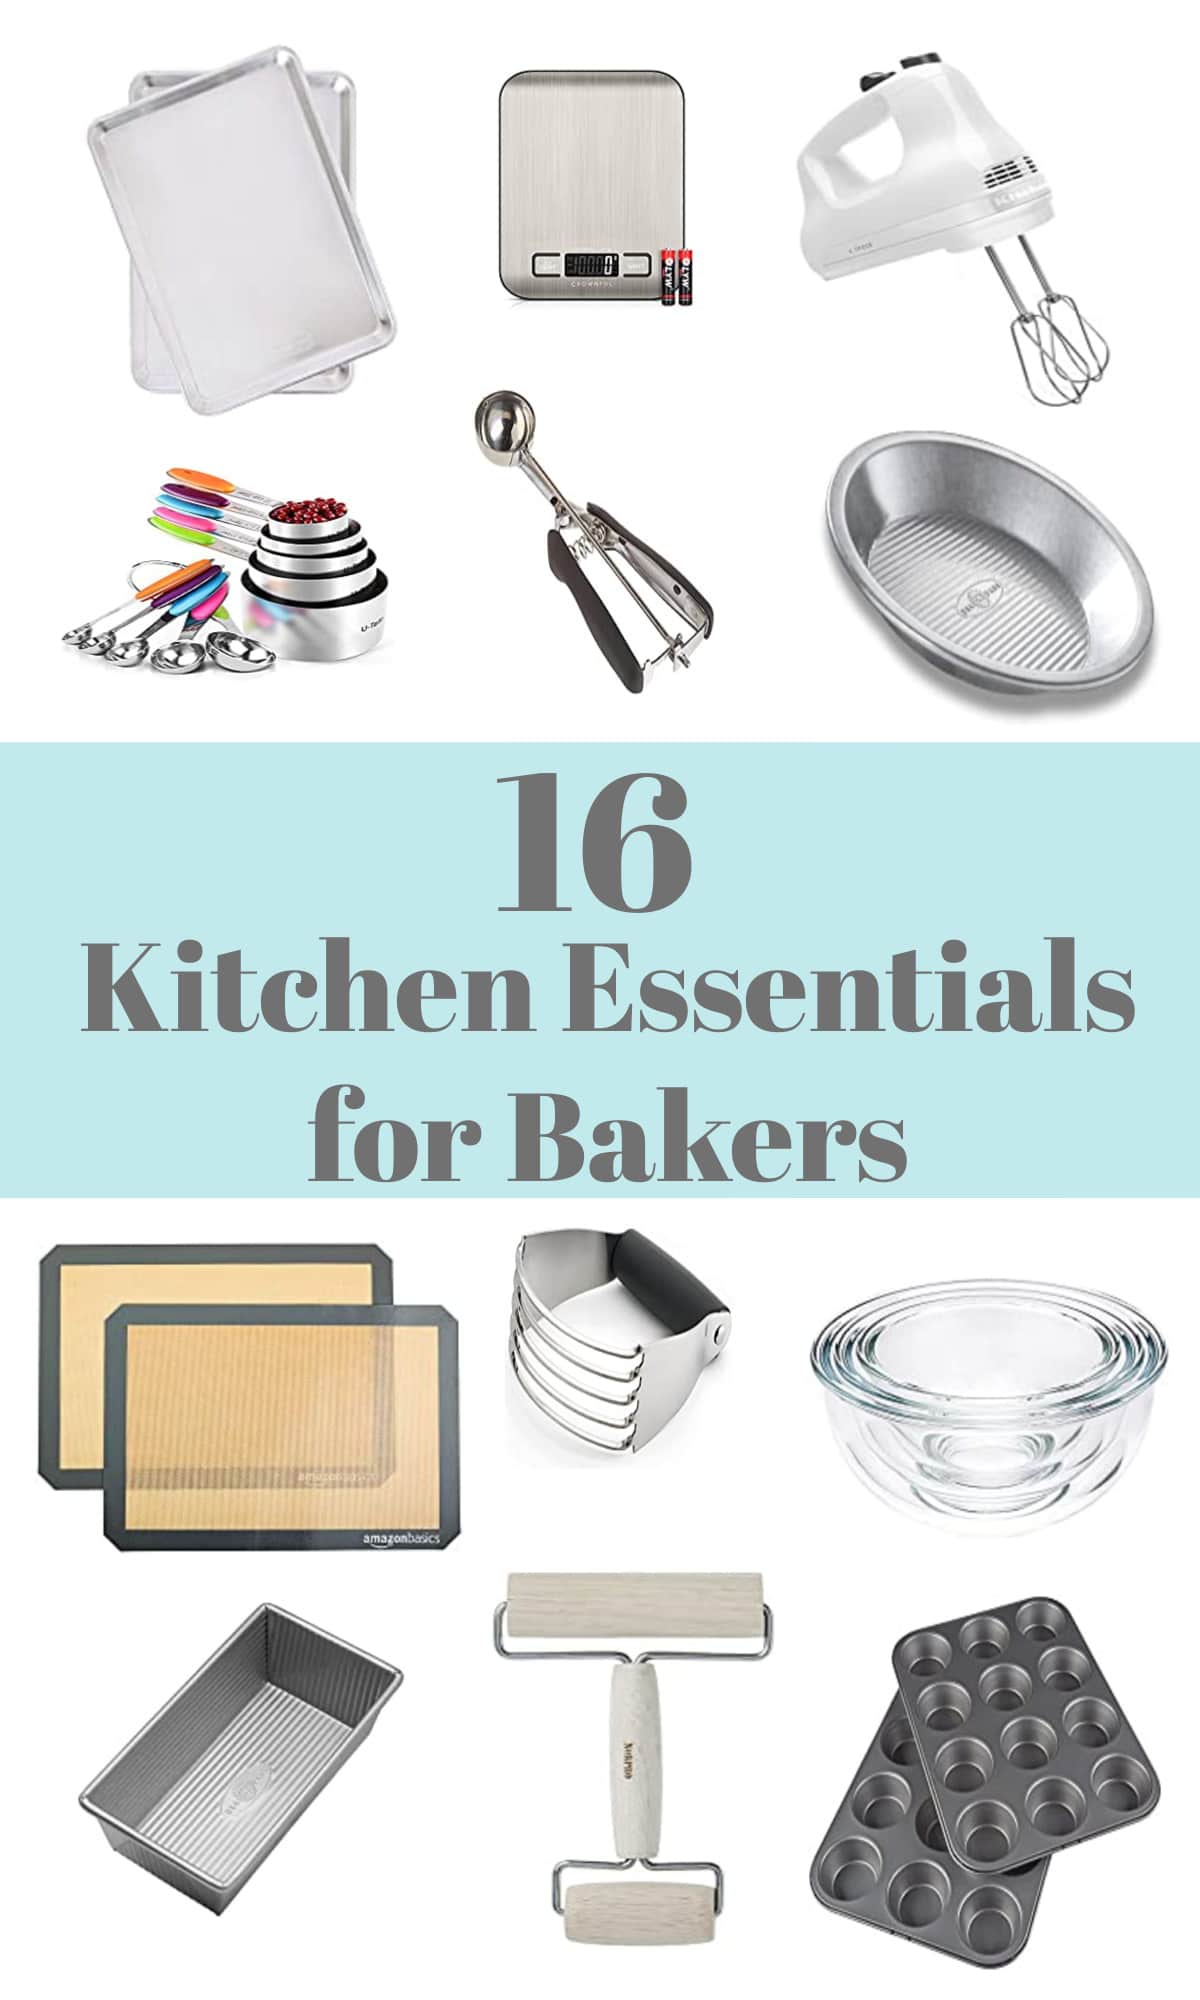 5 Tools French Home Bakers Have in Their Kitchens